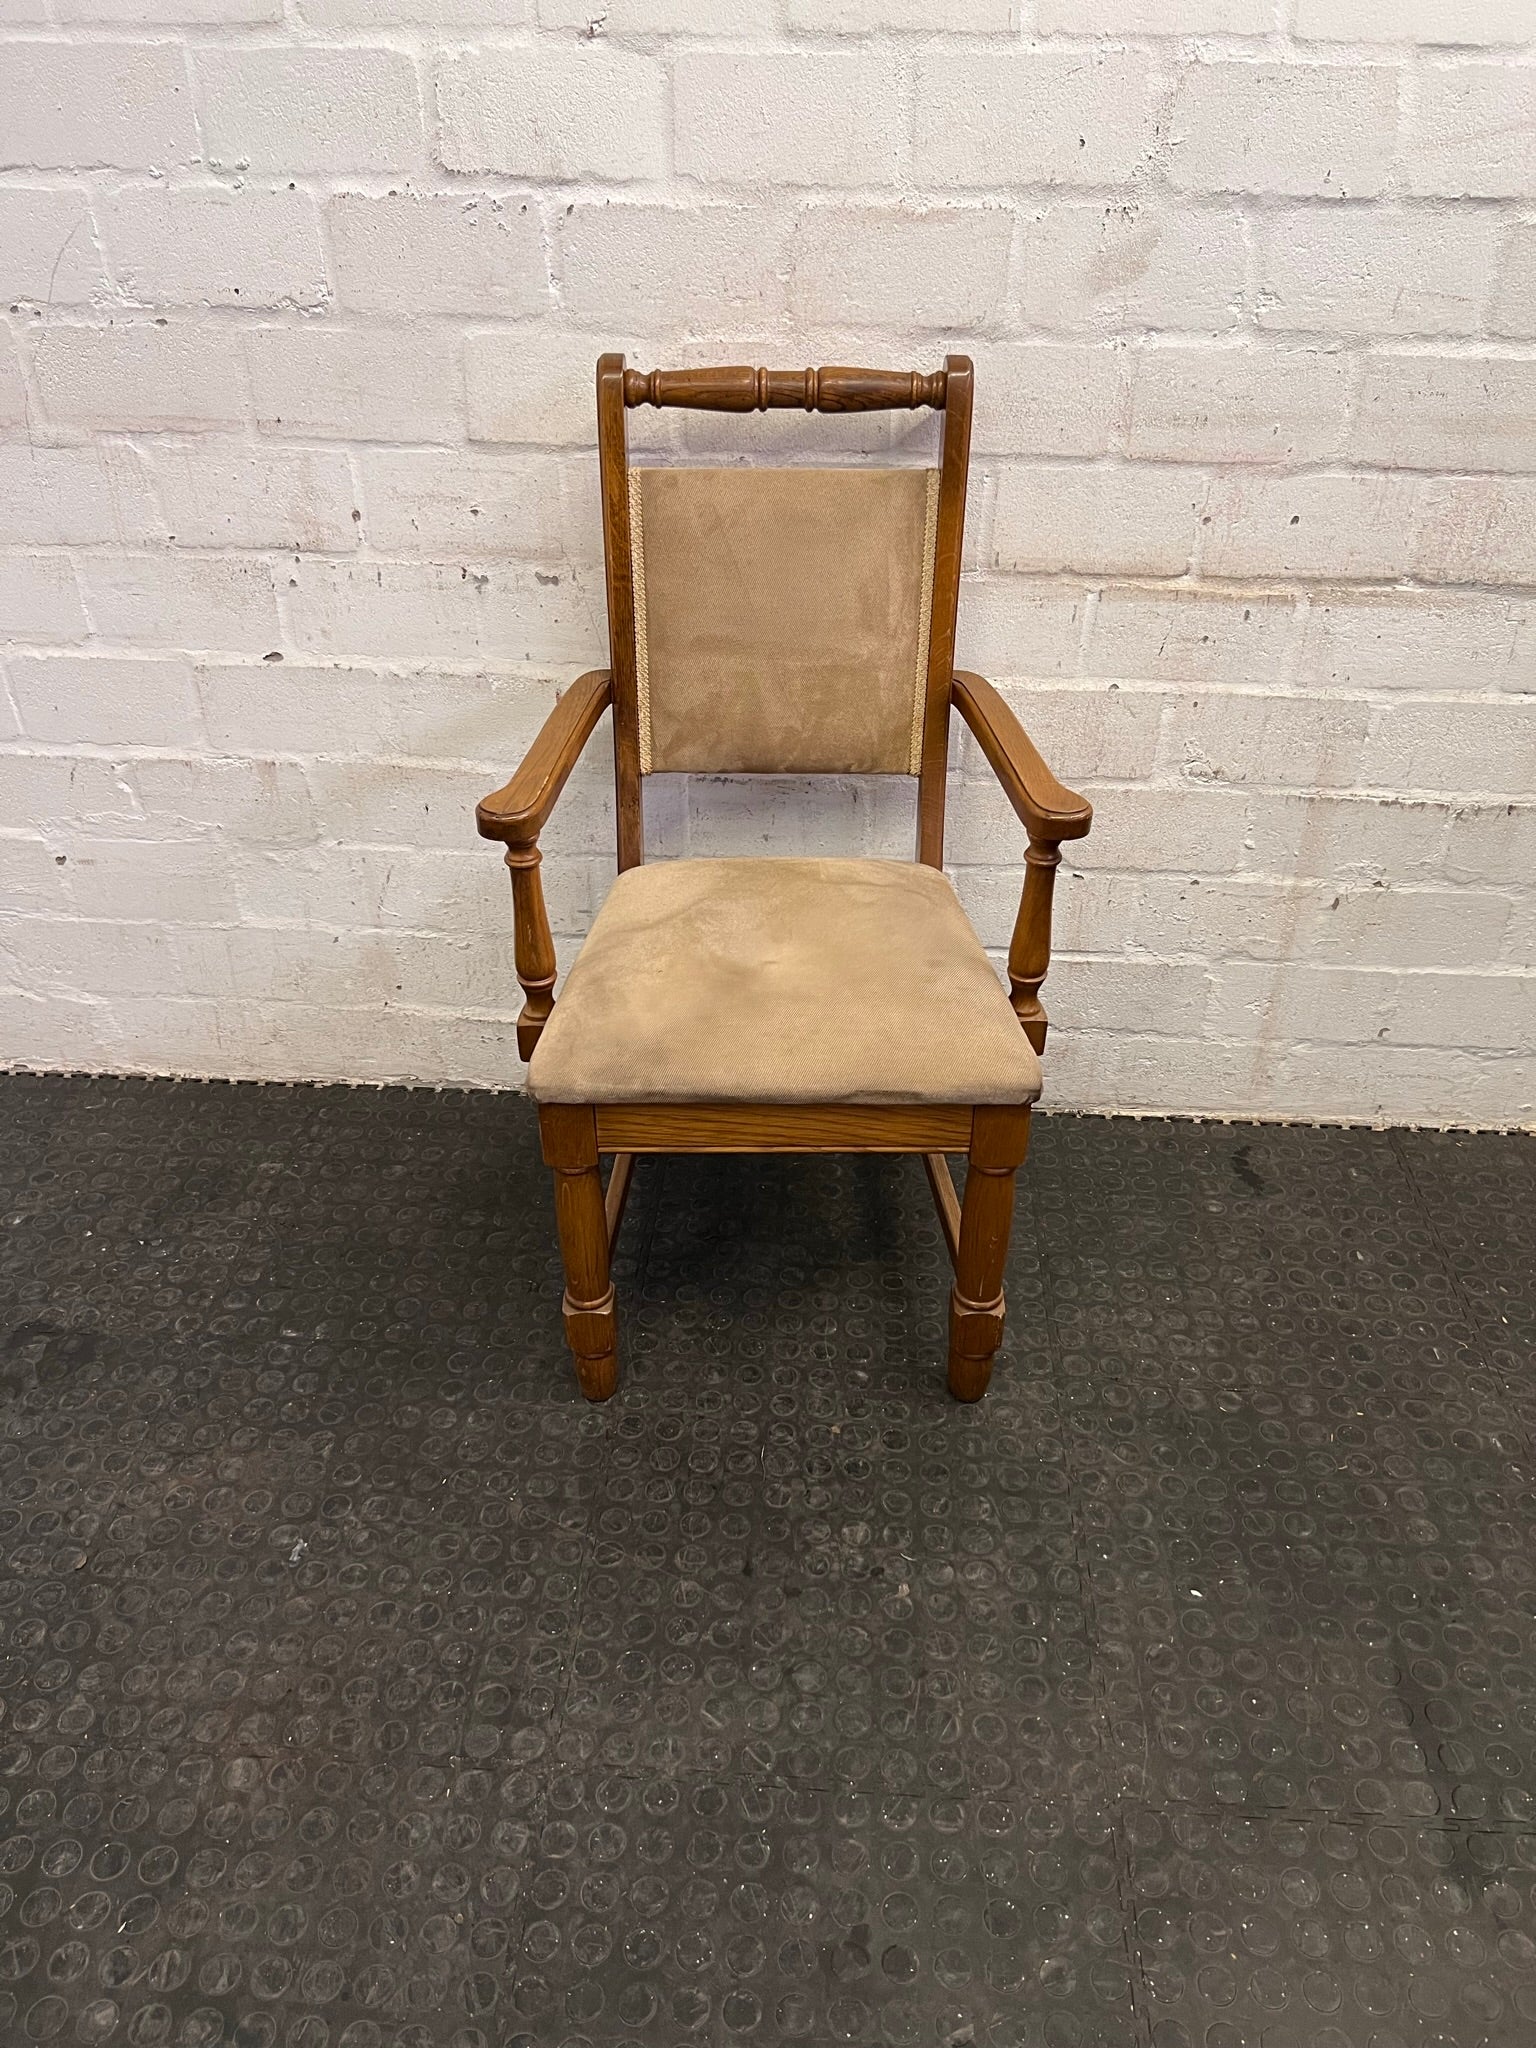 Wooden Framed Beige Cushioned Dining Chair with Arm Rests